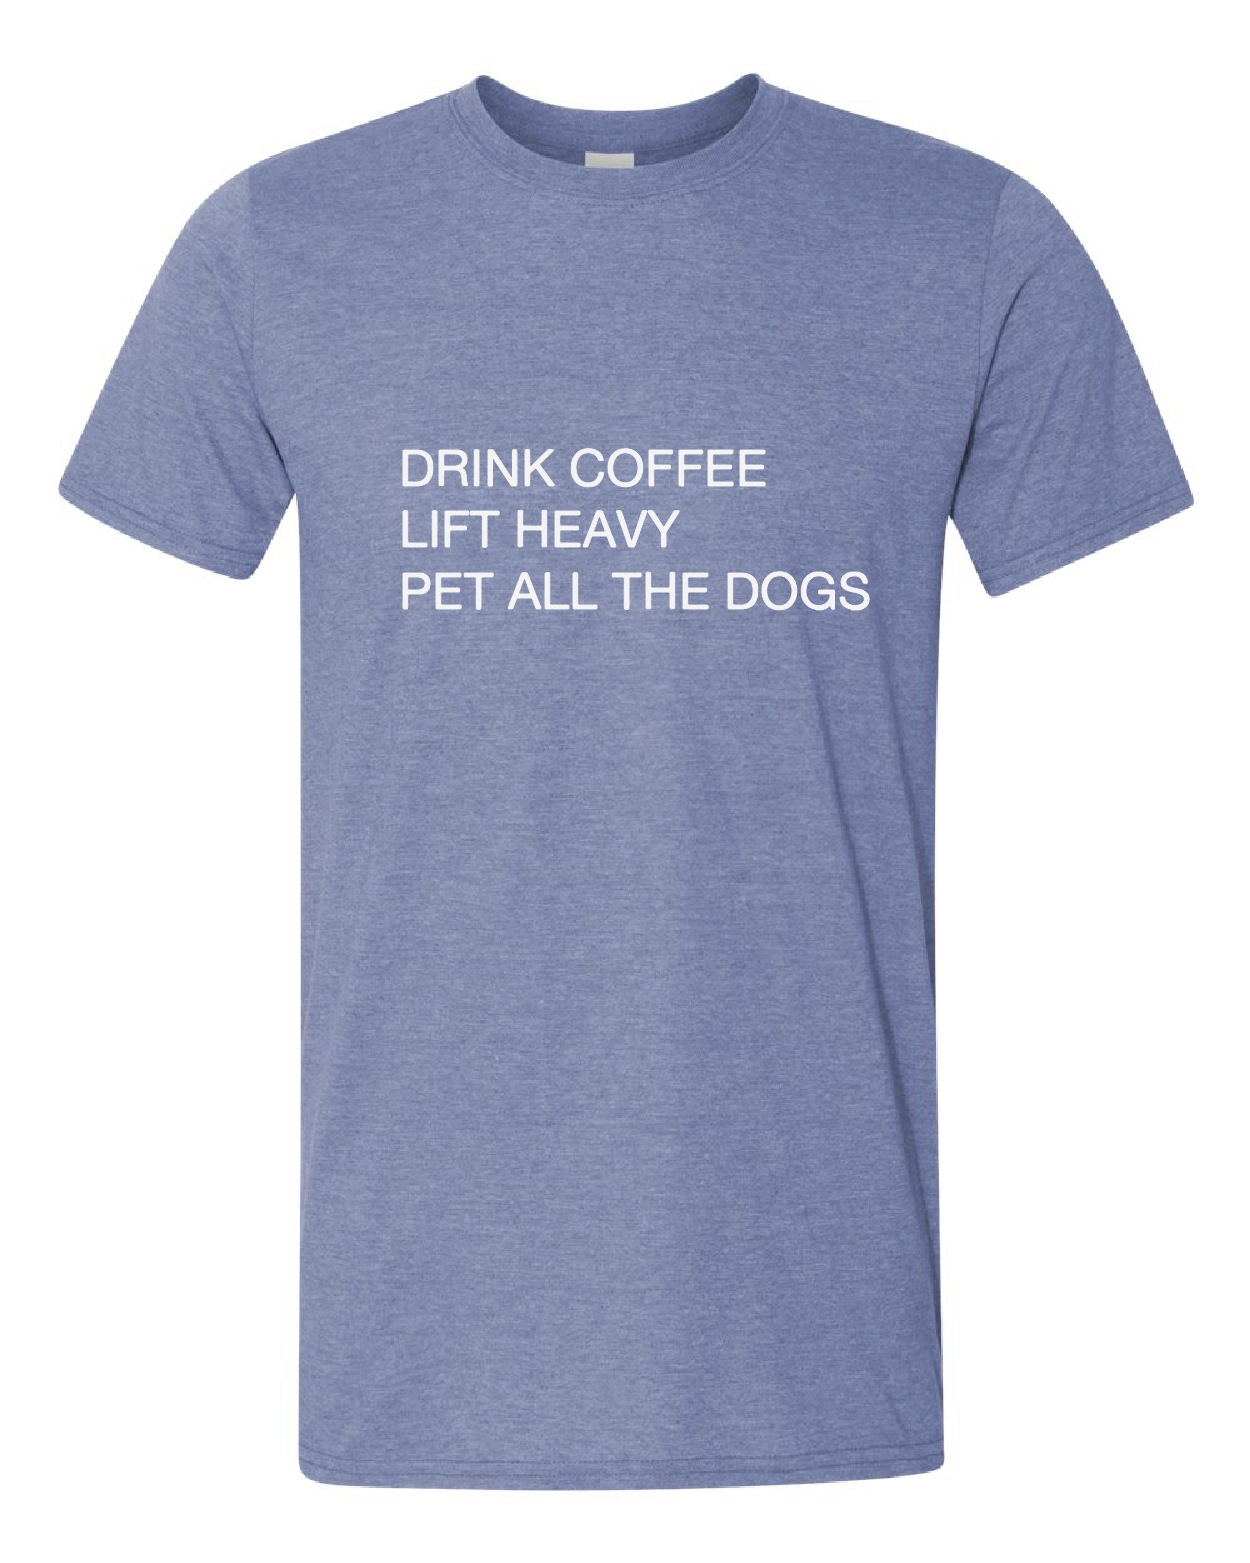 Drink Coffee, Lift Heavy, Pet All The Dogs